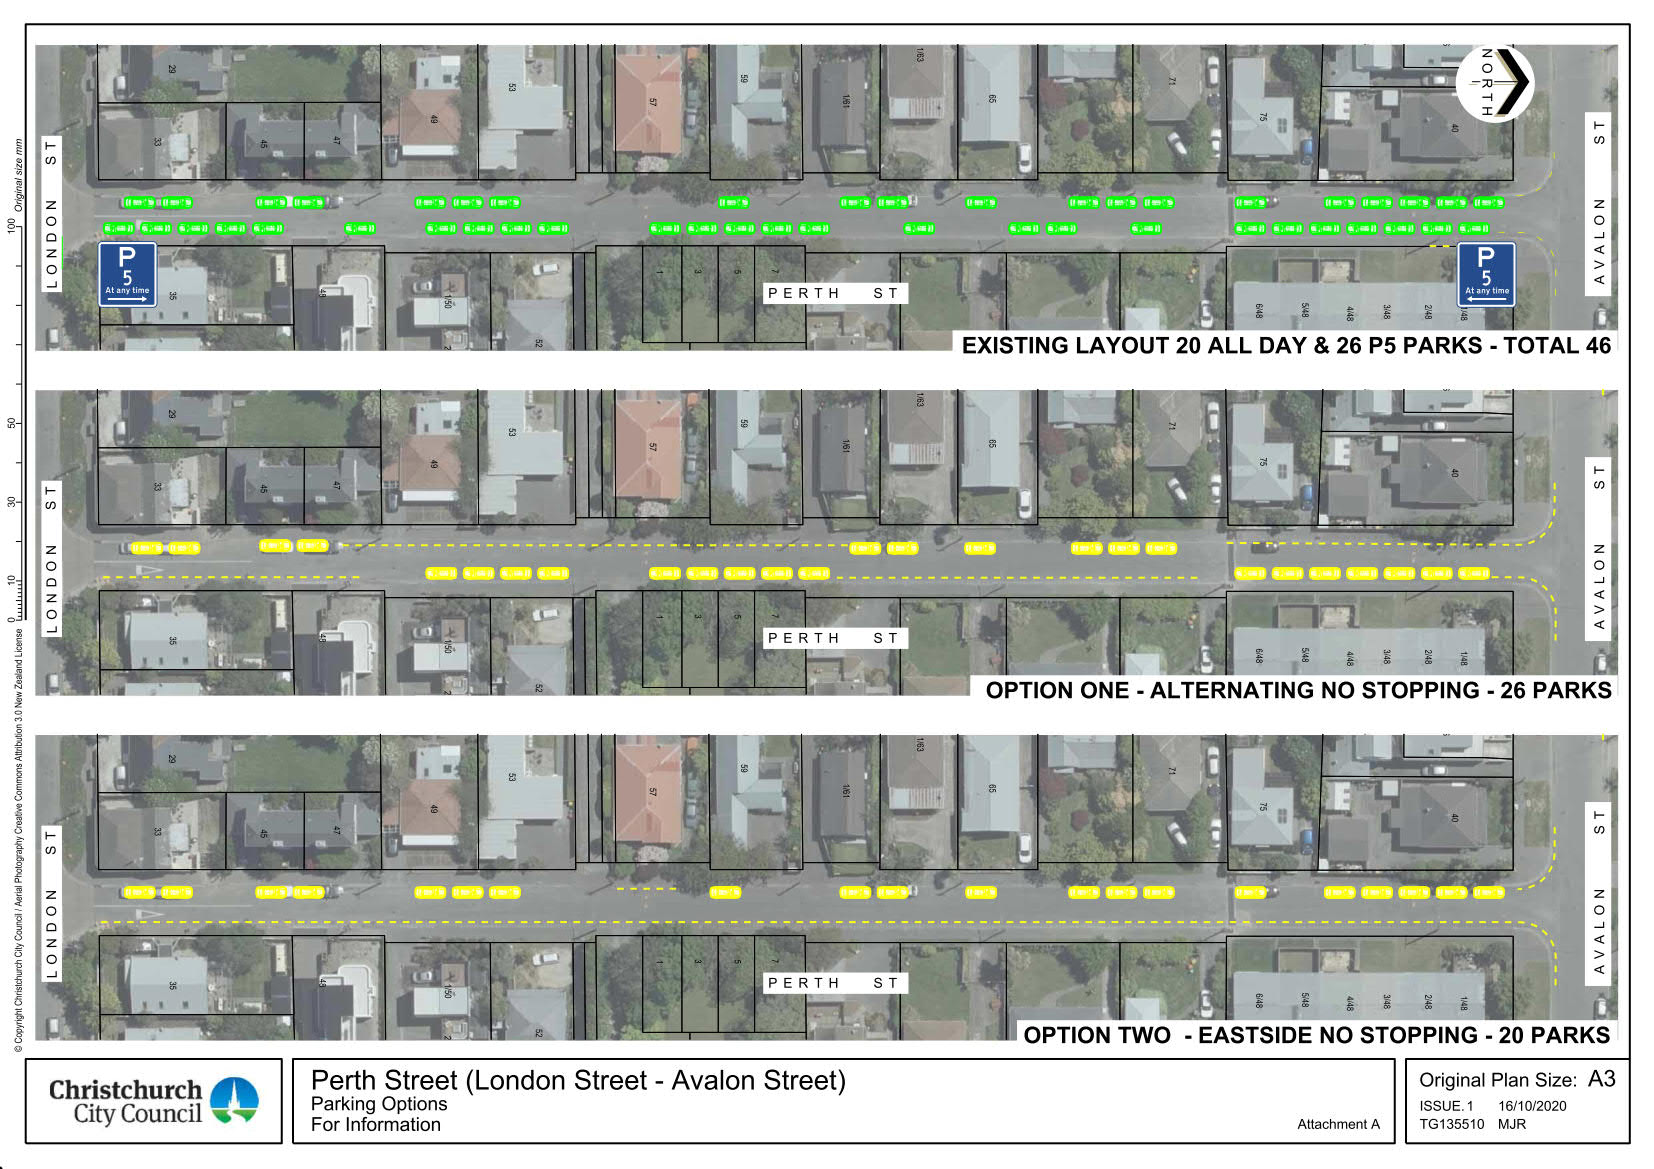 Plan showing the existing layout on Perth Street, including P5 zones, Option one with alternating no stopping and Option two with eastside no stopping. 